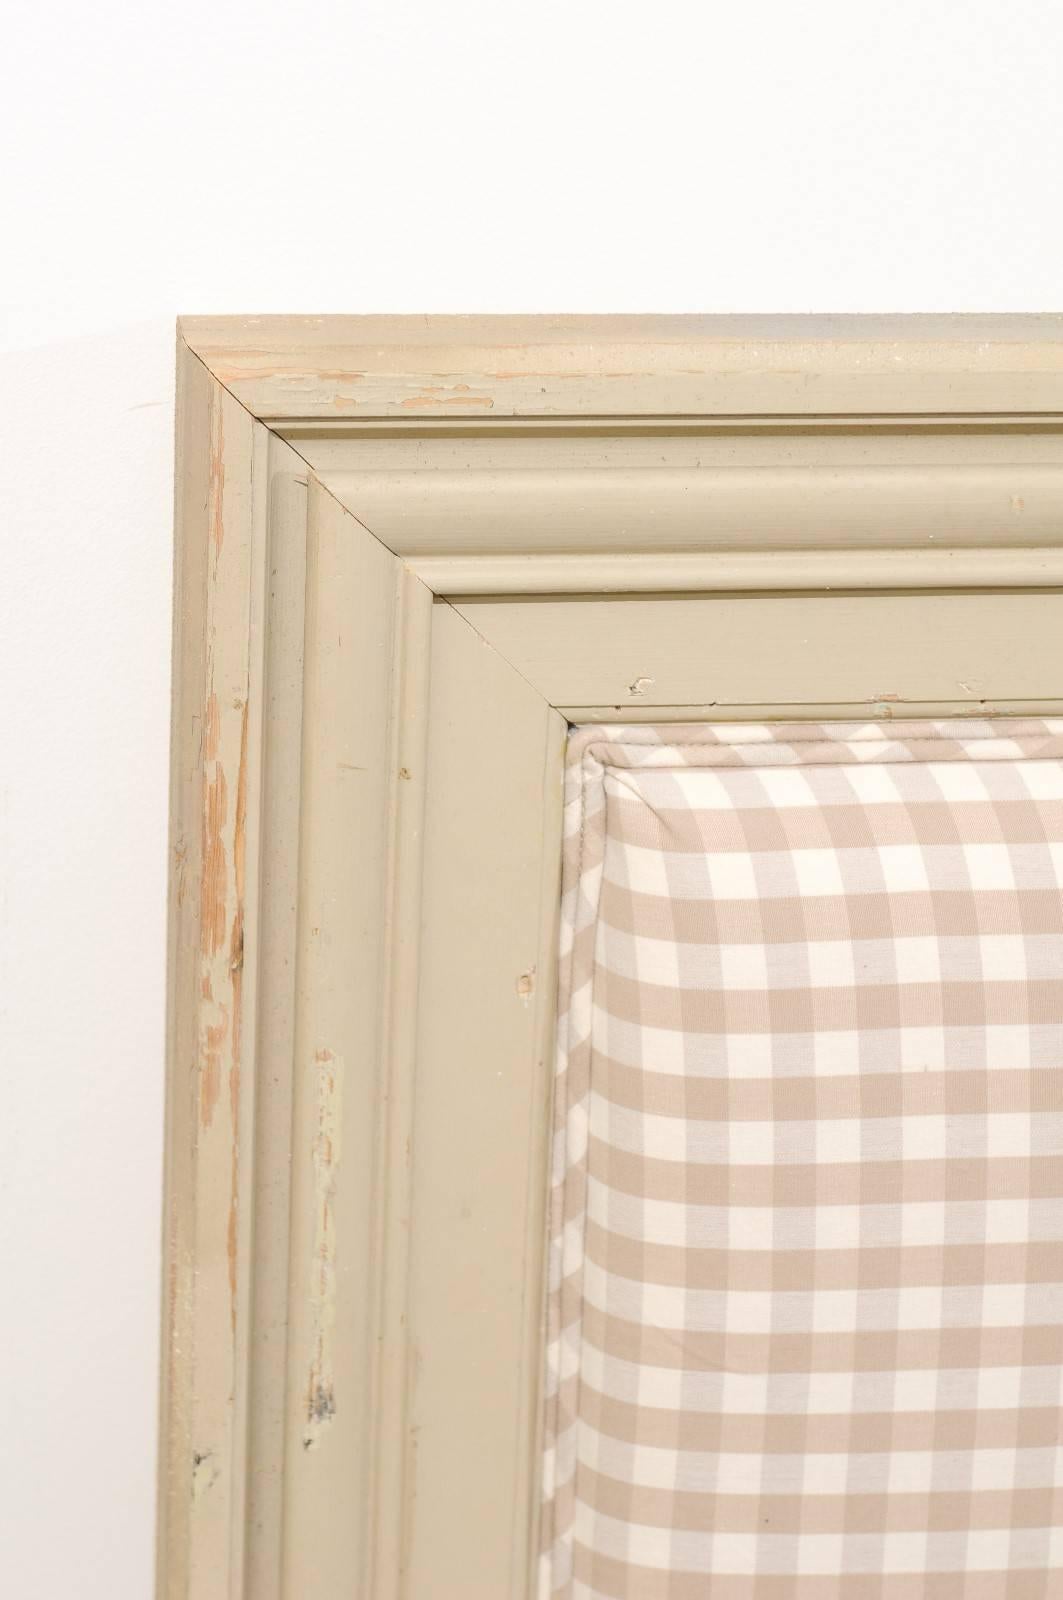 Upholstery King-Size Wood and Plaid Fabric Headboard Made of Antique French Door Molding